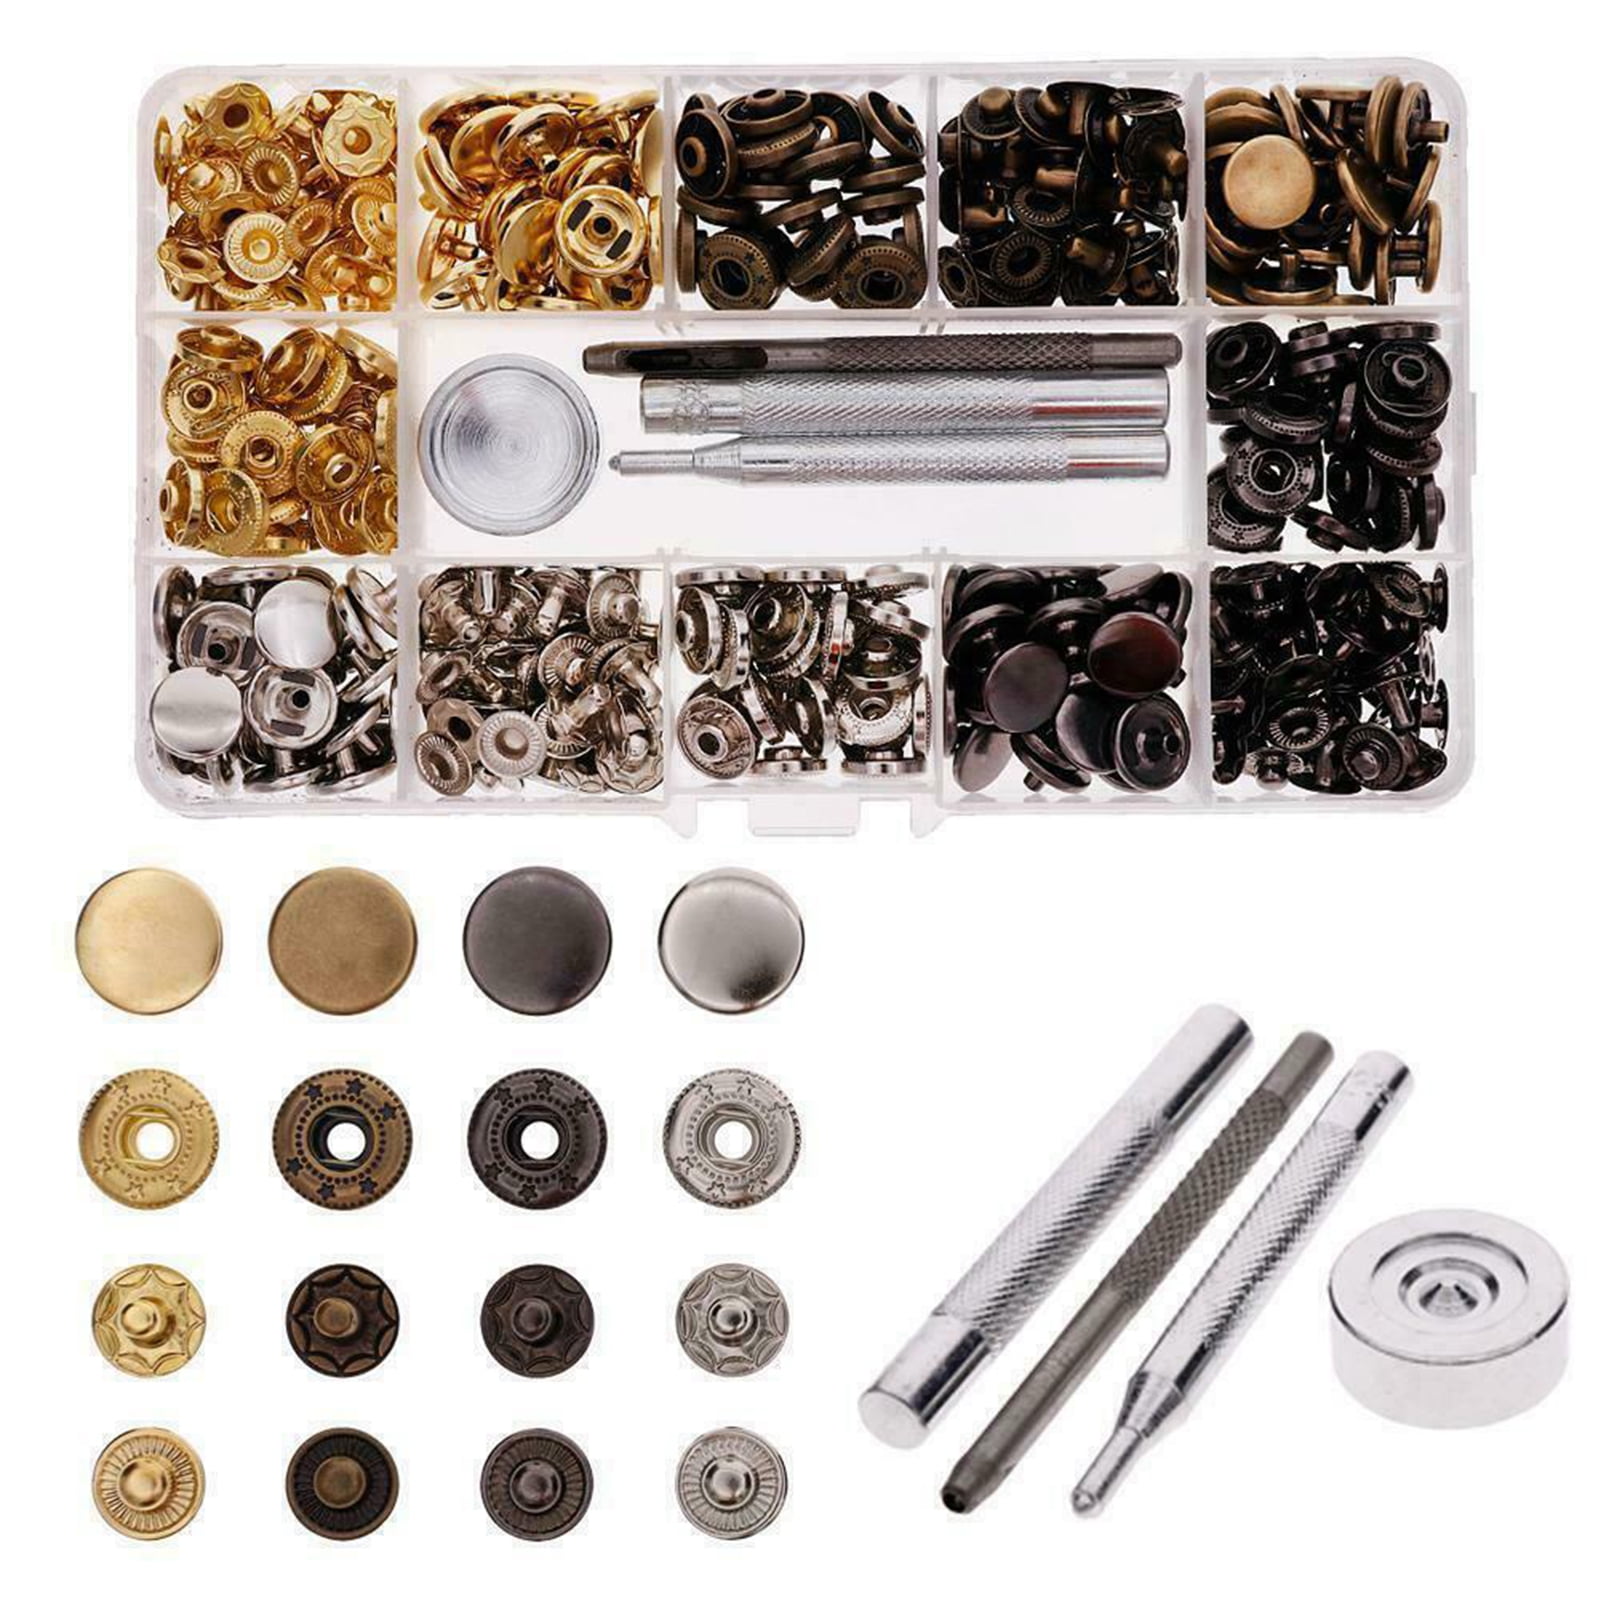 120 Sets Snap Fasteners Kit 12.5mm Metal Snap Buttons Set Press Studs with 4 Pcs Fixing Tools for Clothing Snaps Kit for Thin Leather Jacket Jeans Wear Bracelet Bags 12 Colors 